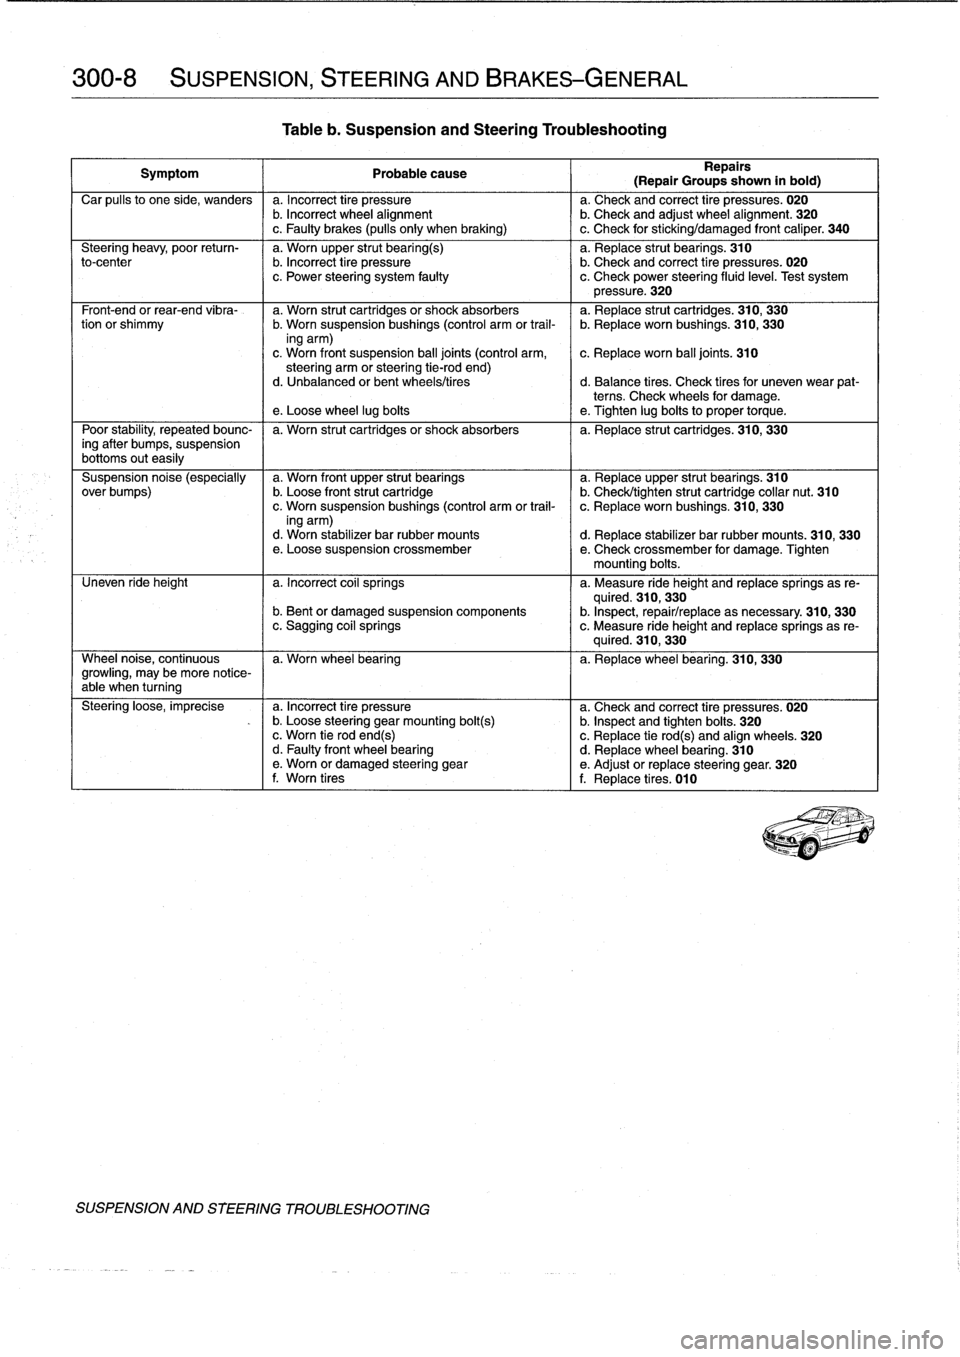 BMW 323i 1998 E36 Workshop Manual 
300-8

	

SUSPENSION,
STEERING
AND
BRAKES-GENERAL

Tableb
.
Suspension
and
Steering
Troubleshooting

Symptom

	

1

	

Probable
cause
Repairs
(Repair
Groups
shown
in
bold)

Car
pulís
to
one
side,
wa